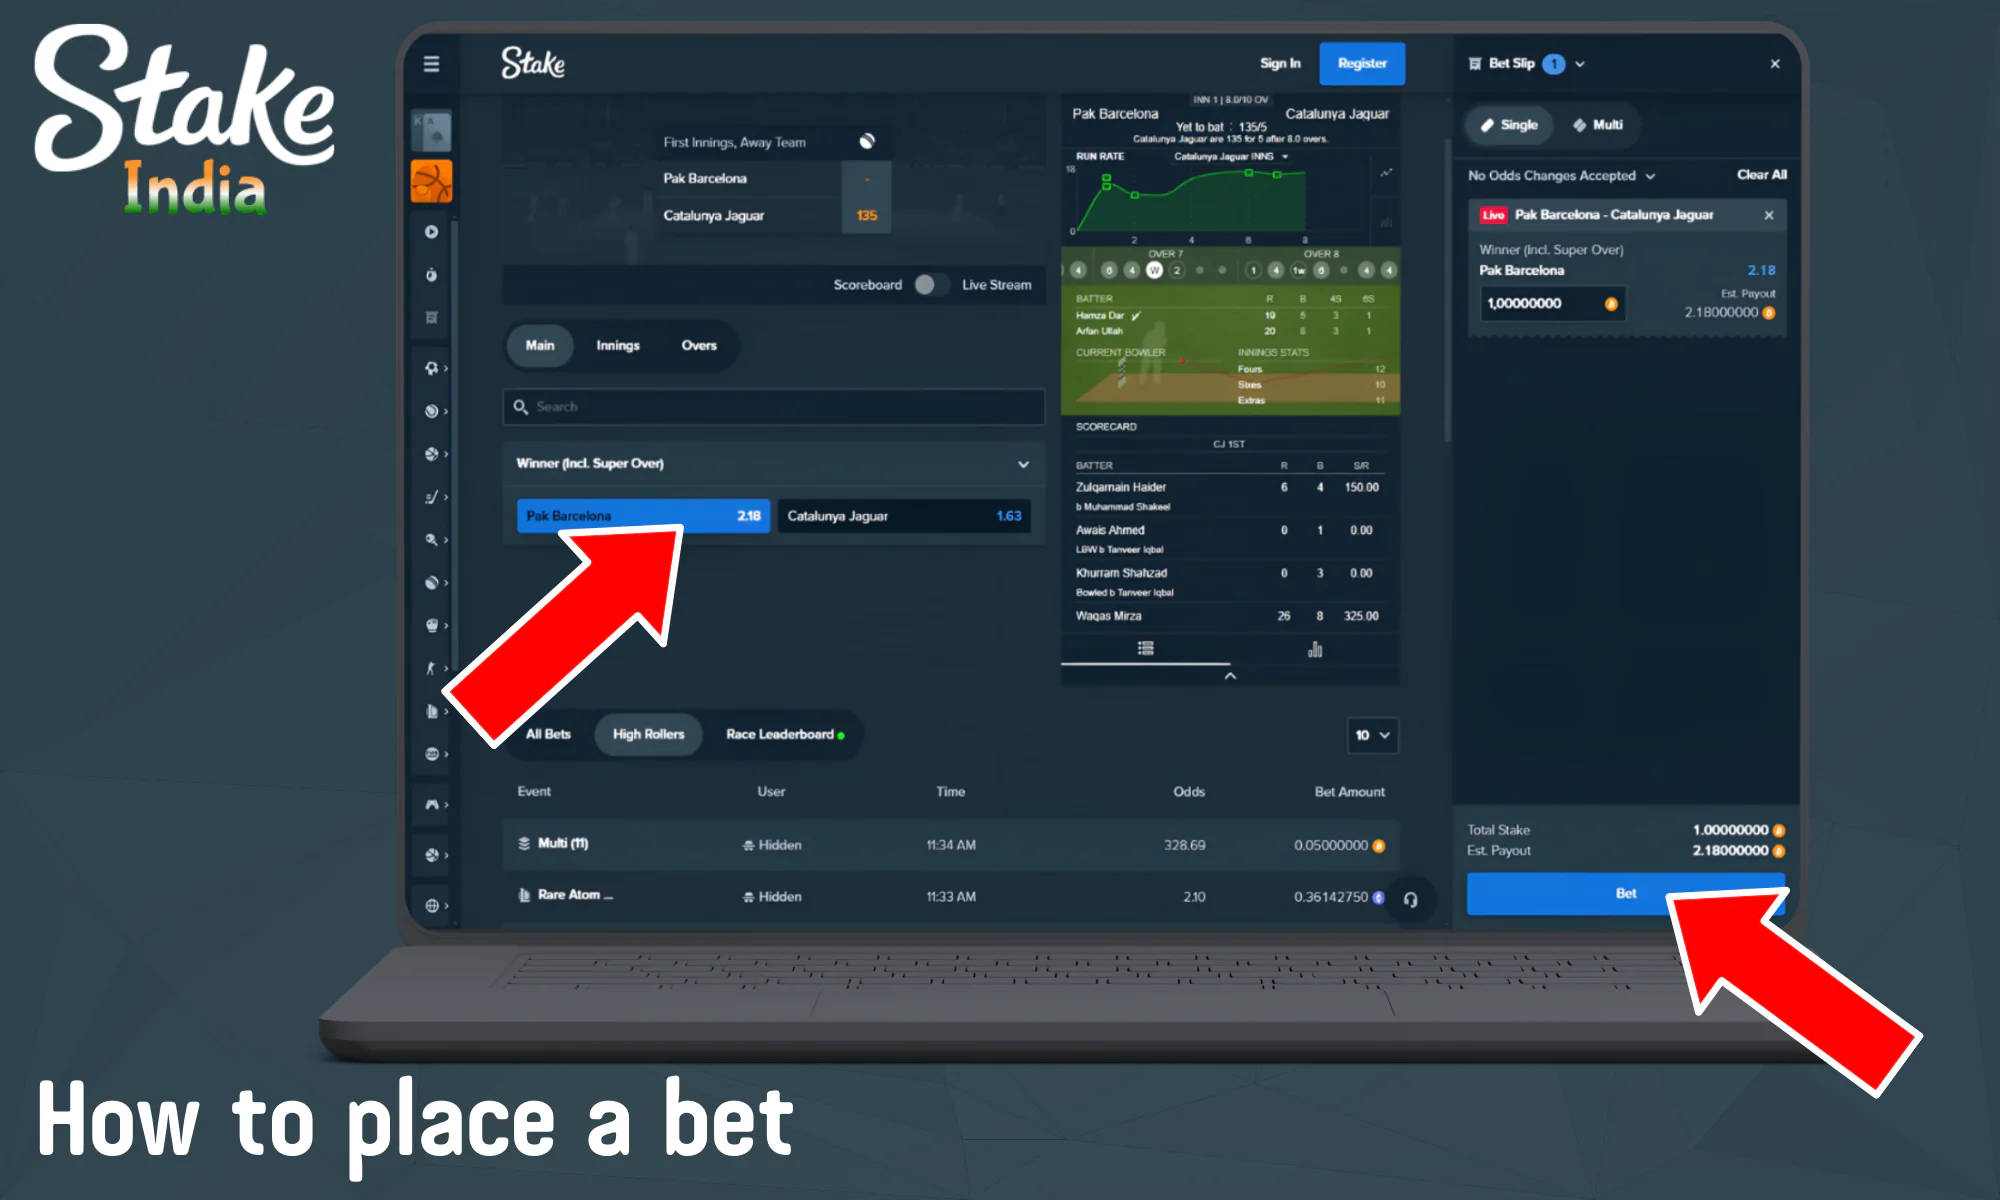 Step-by-step instructions on how to start betting at Stake